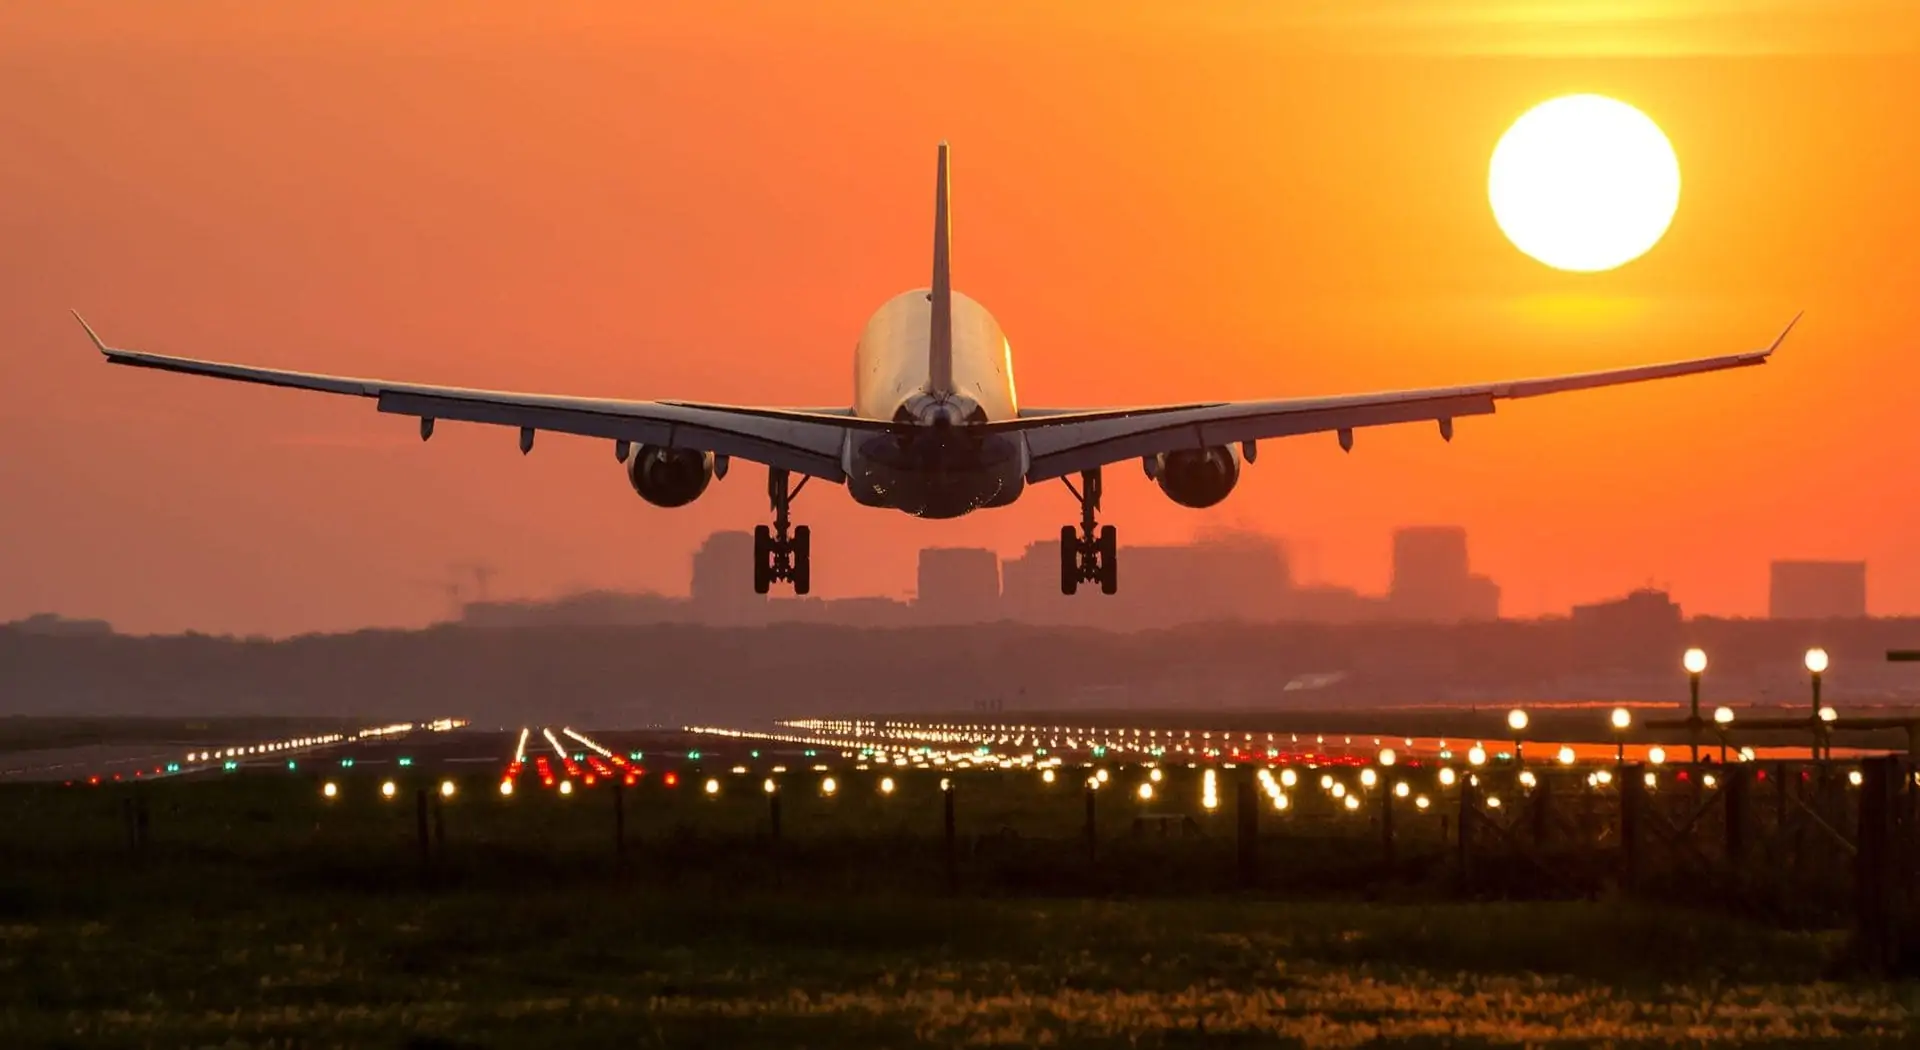 Airplane Taking Off in Sunset